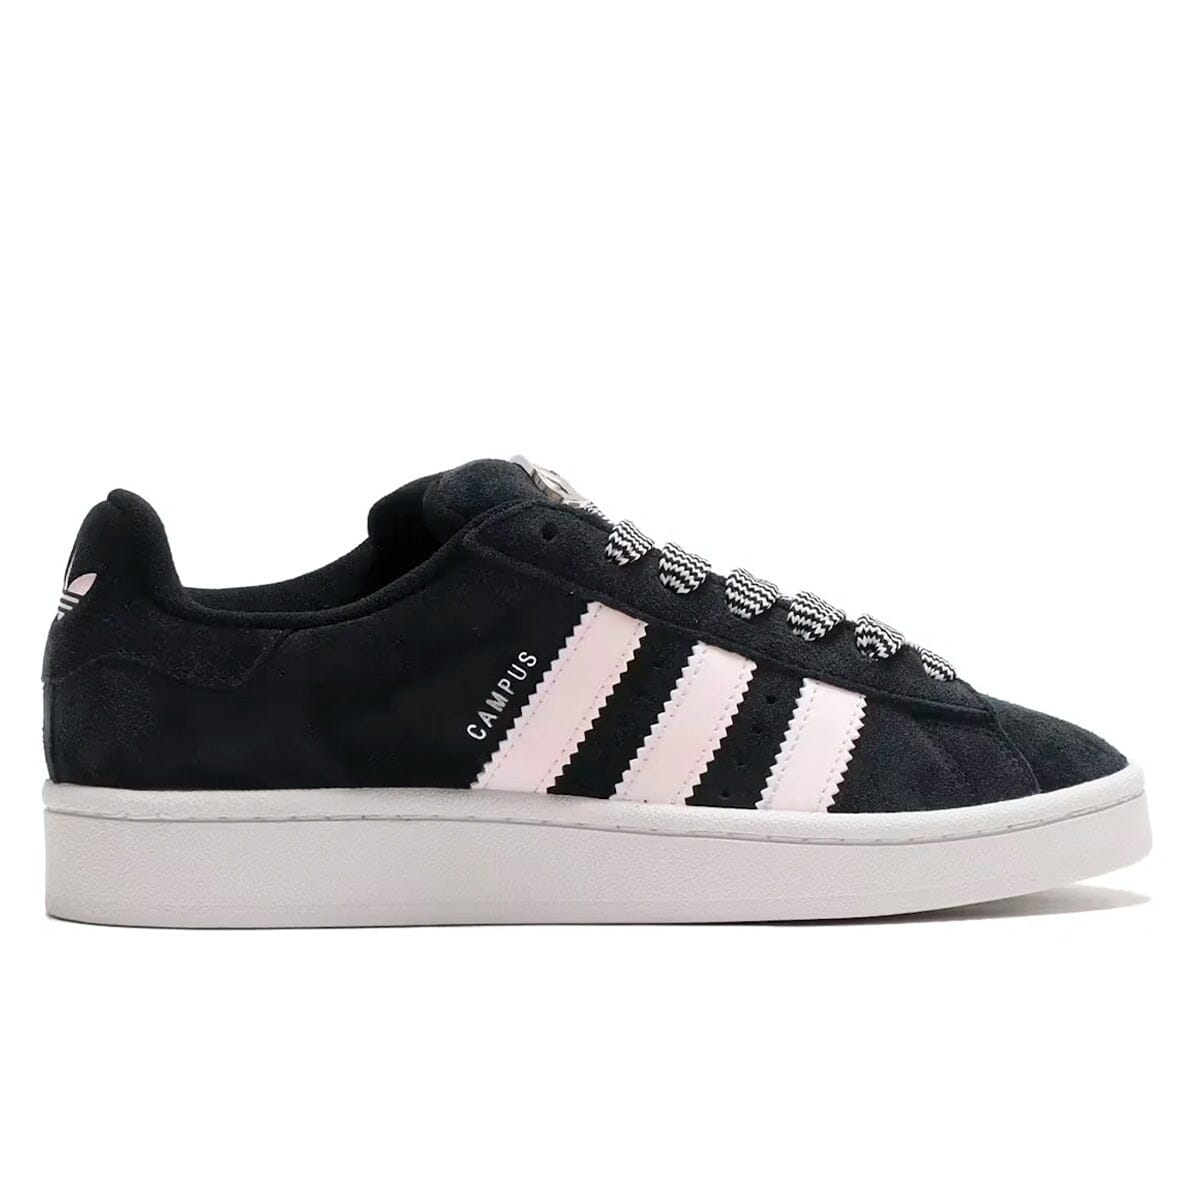 Adidas Campus 00s Black Pink Blizz Sneakers 